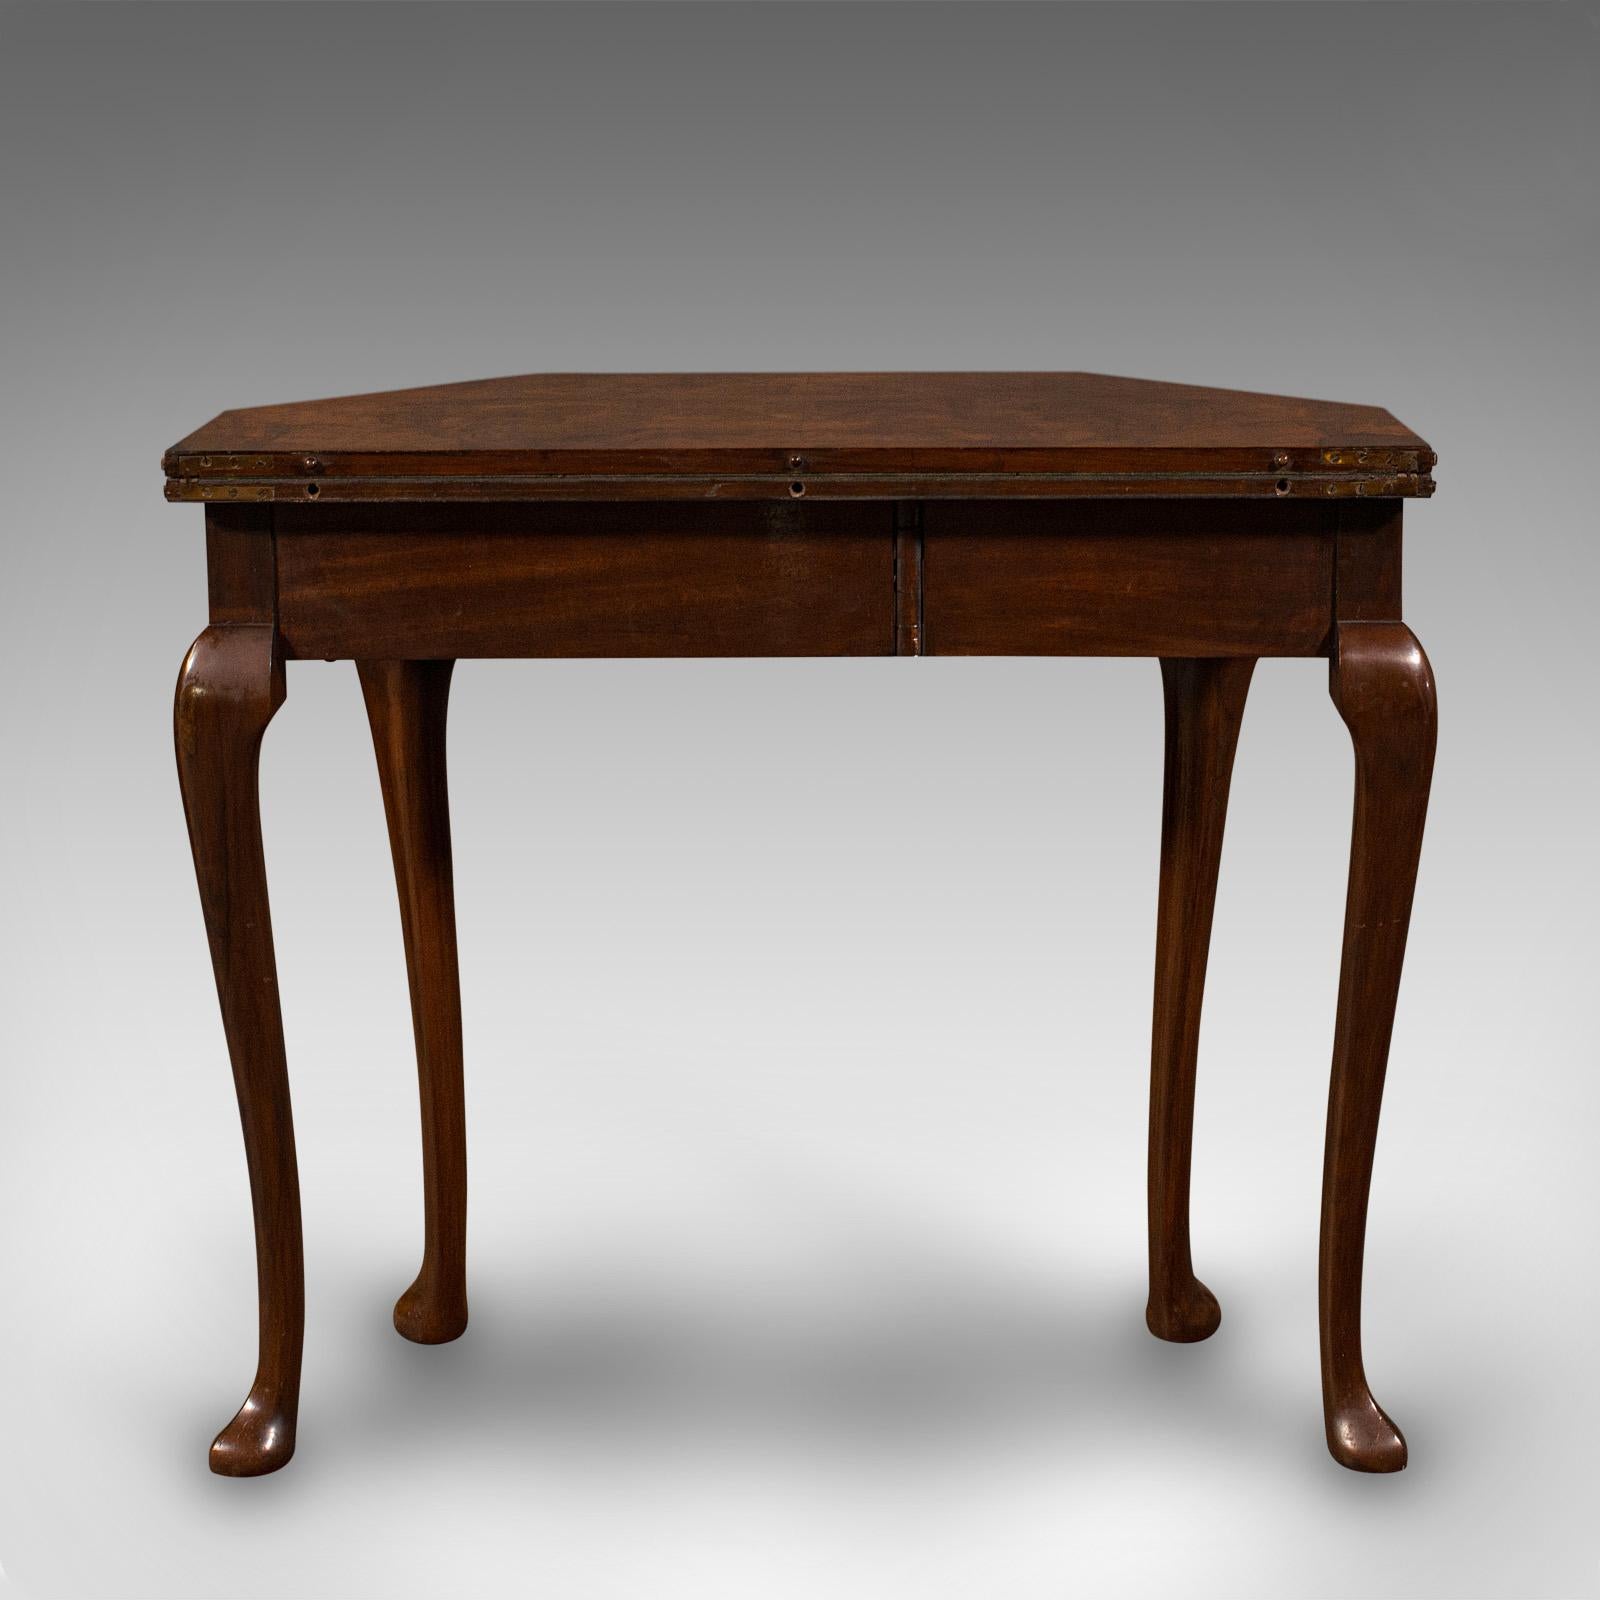 Antique Fold Over Card Table, English Walnut, Games, Georgian Revival, Edwardian In Good Condition For Sale In Hele, Devon, GB